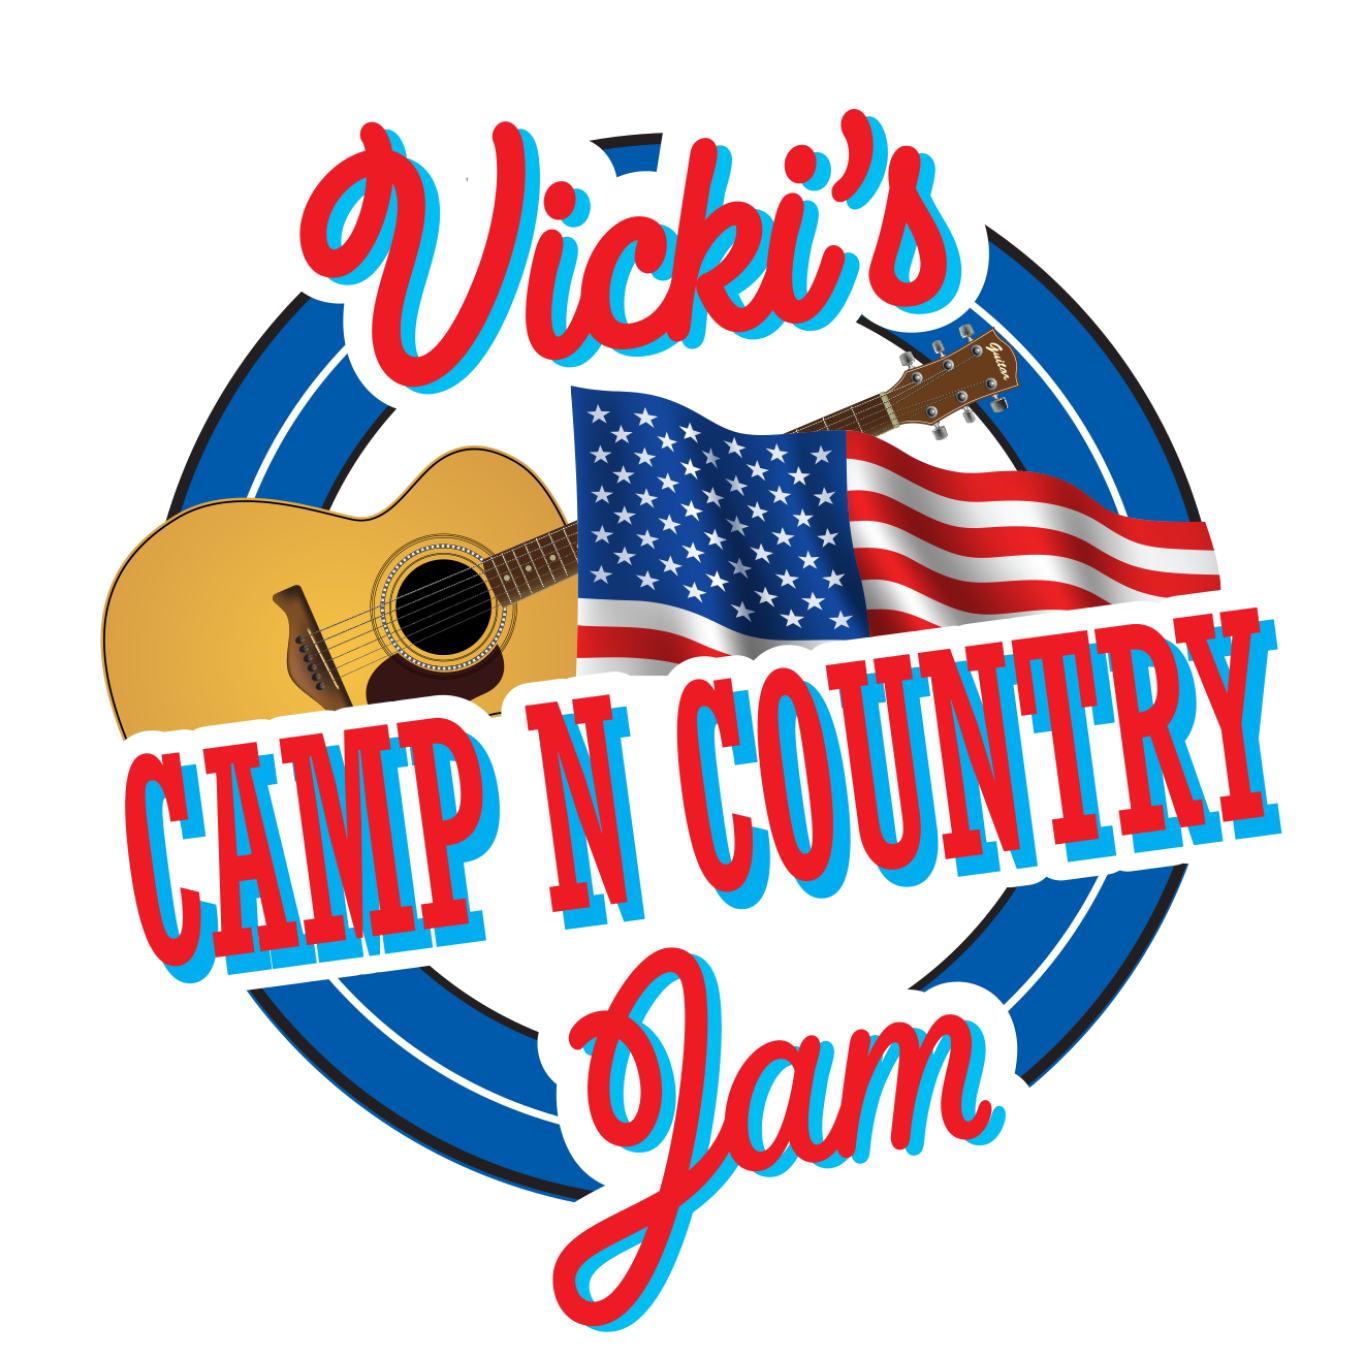 Vickis Camp N Country Jam